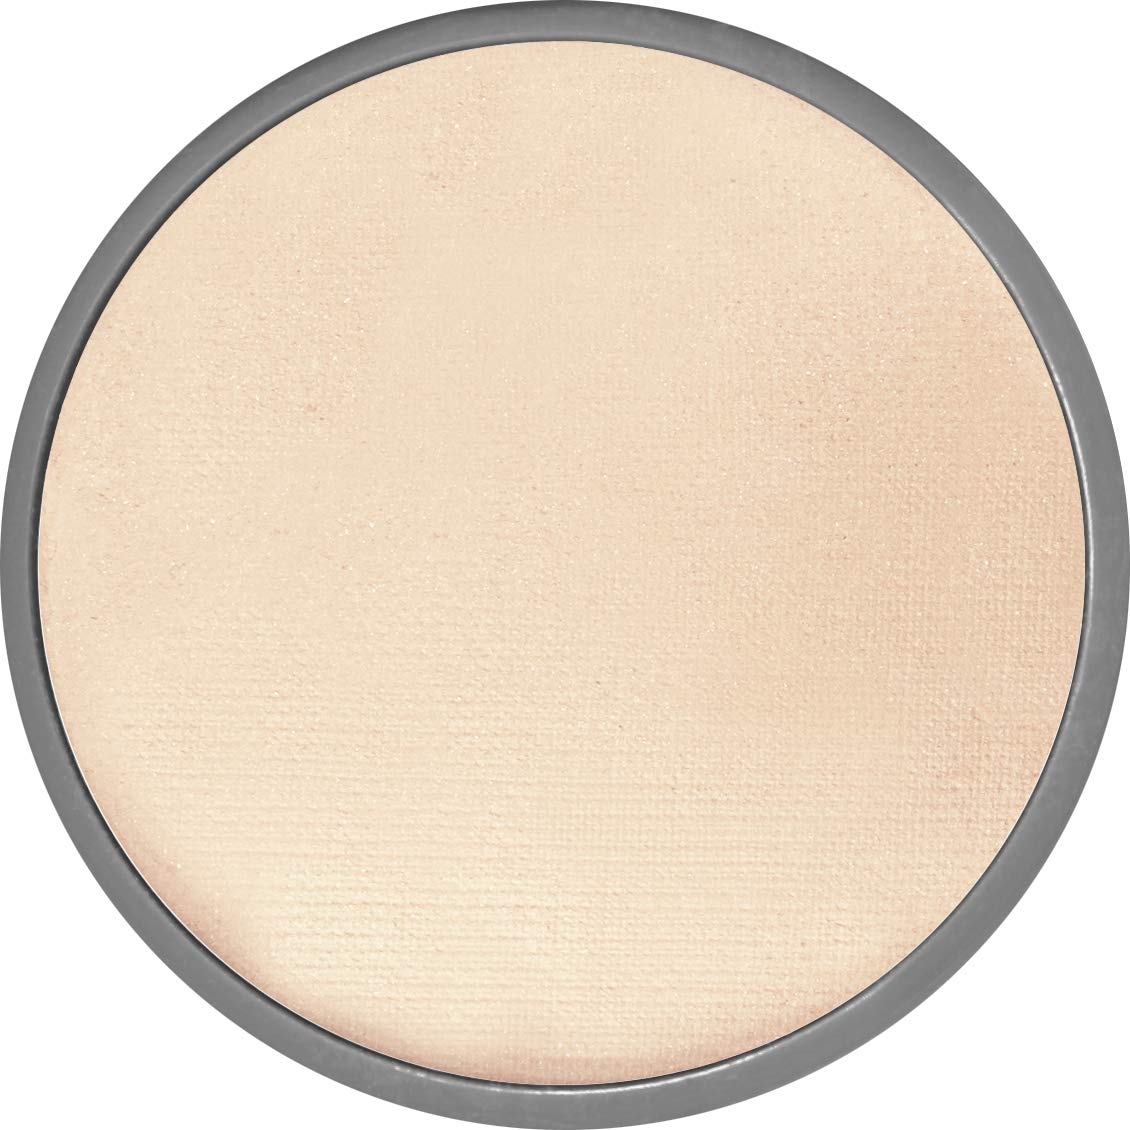 Lauren Brooke Cosmetiques Pressed Foundation, Natural and Organic Makeup (Cool No. 10) …